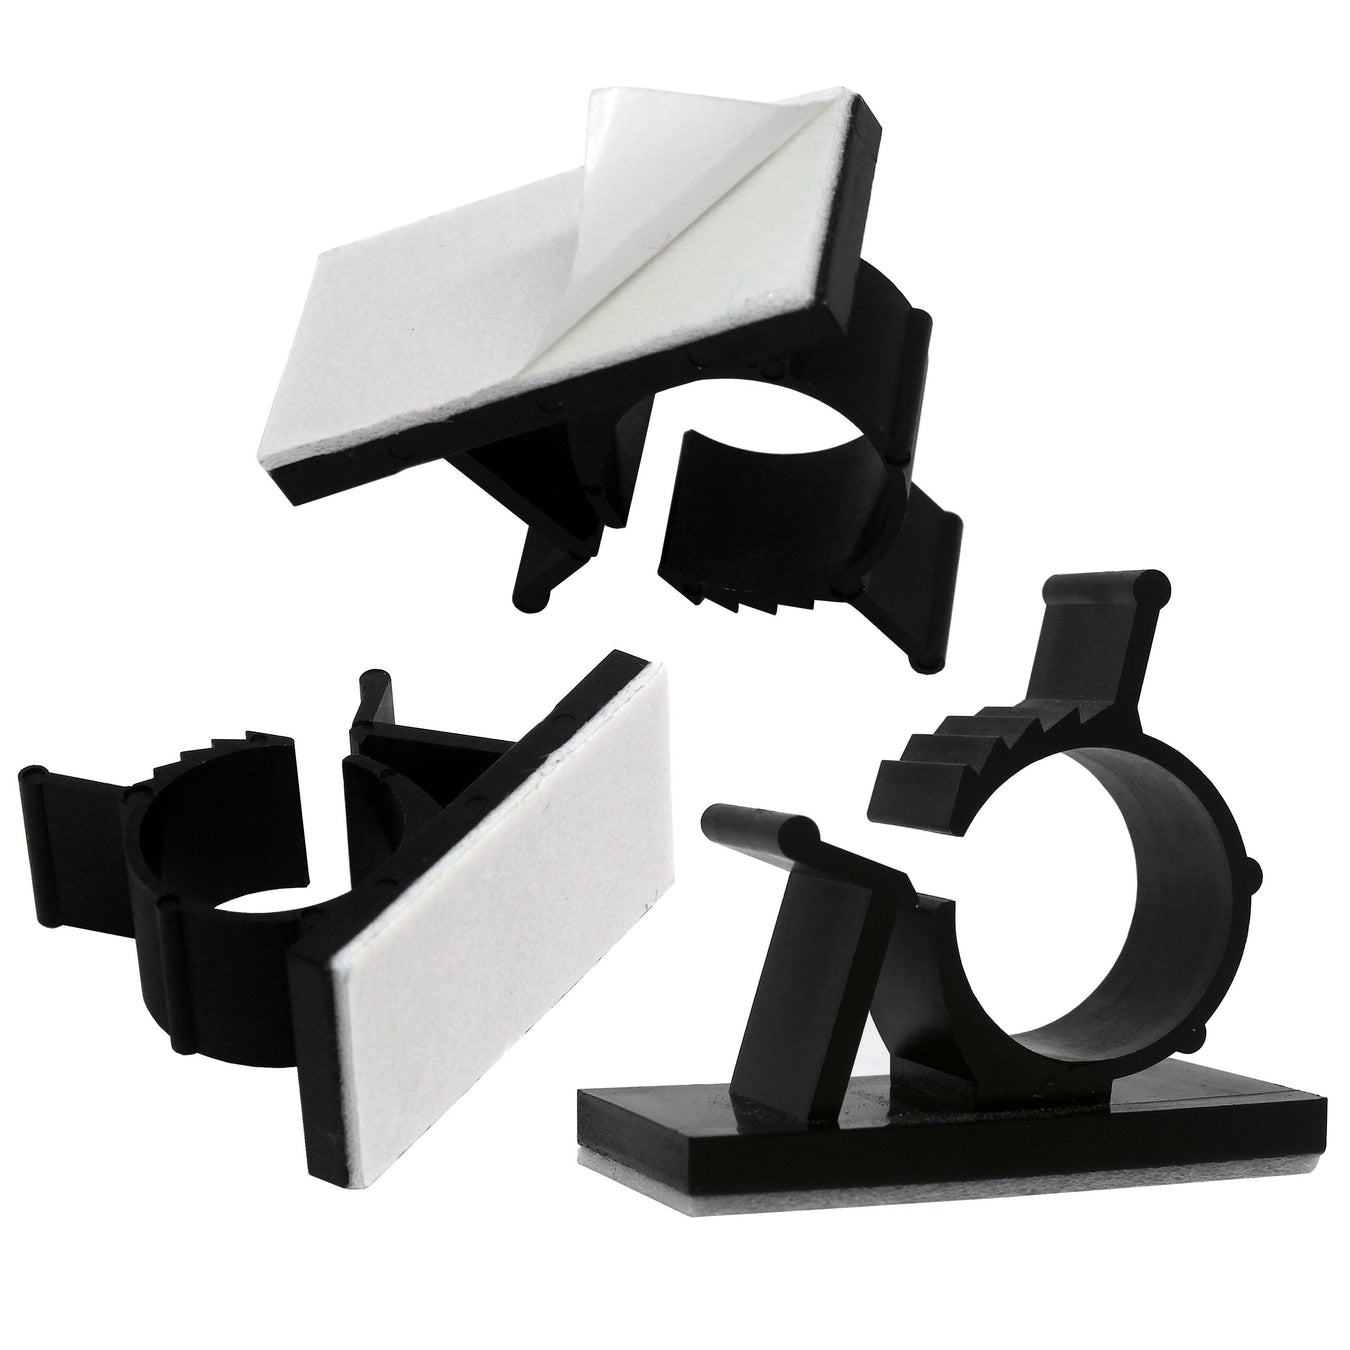 Self-Adhesive Adjustable Cable Clamps